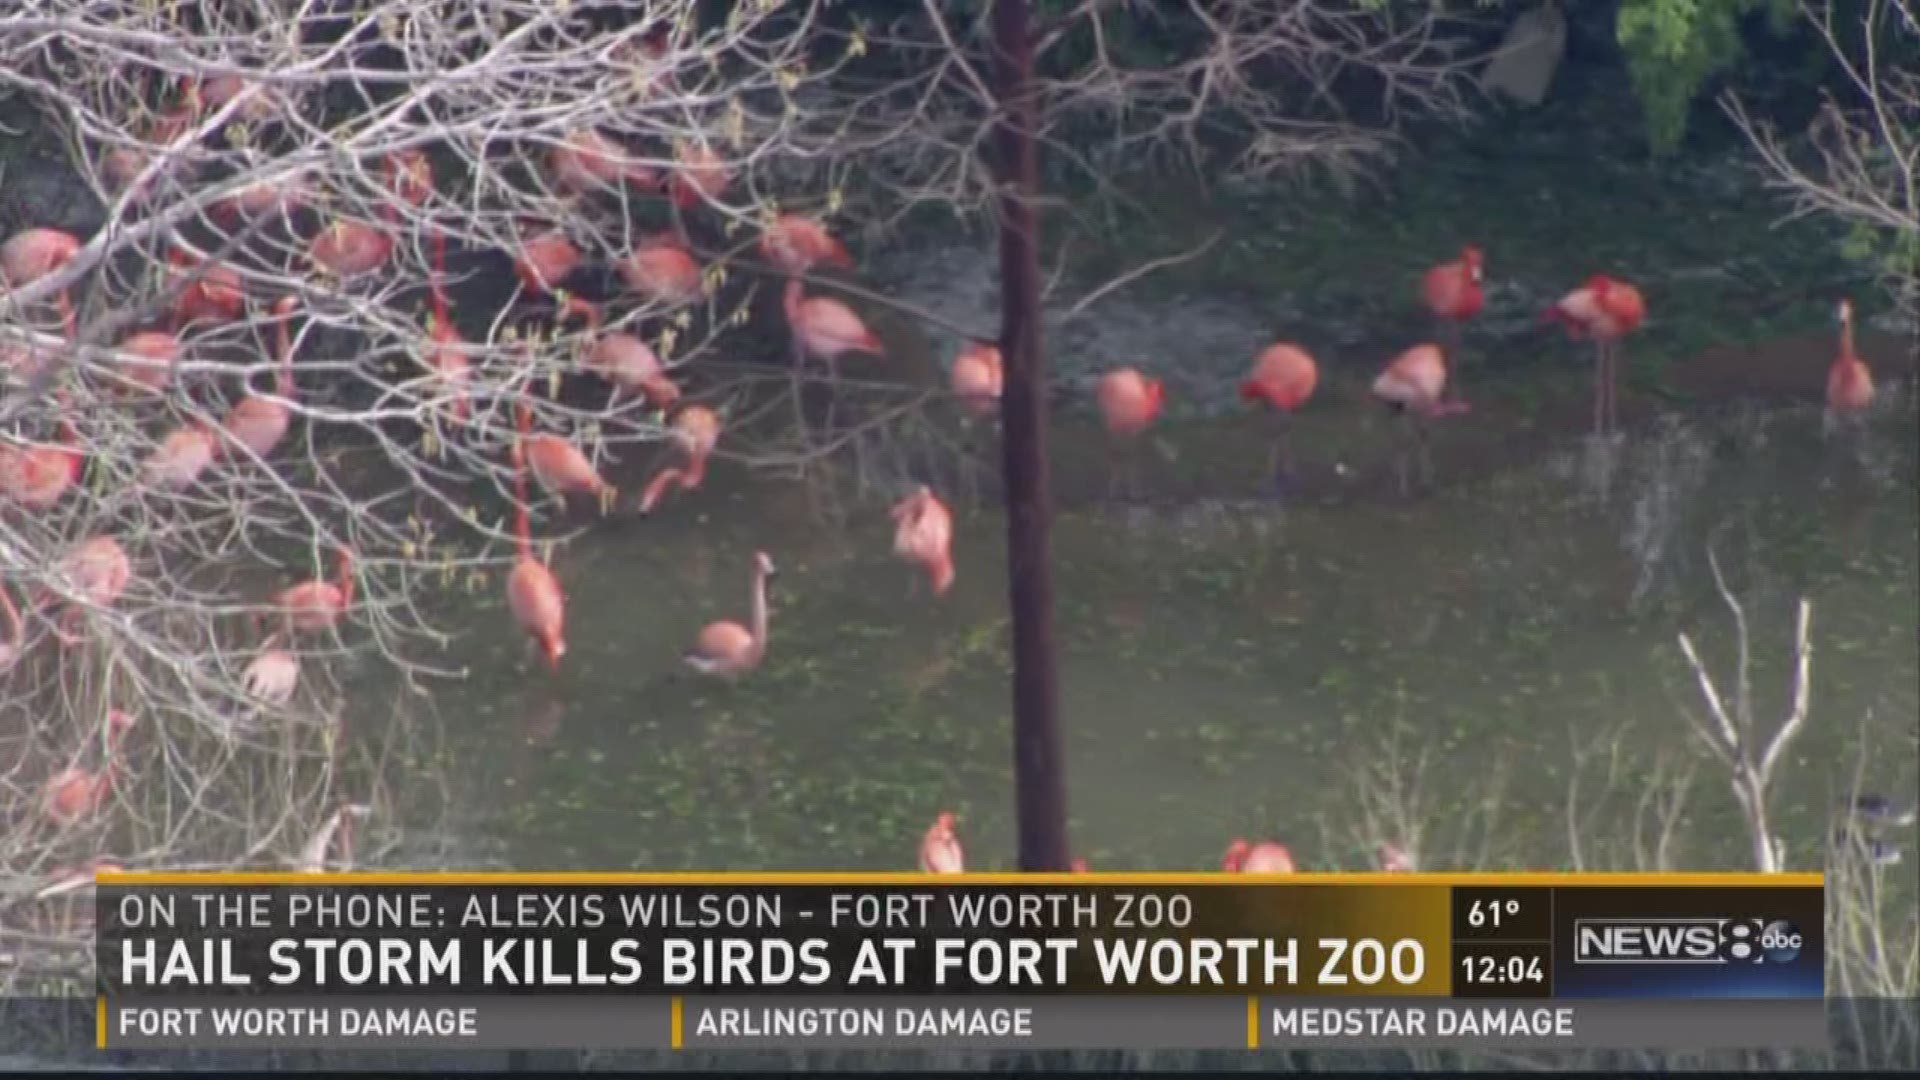 Fort Worth Zoo Communications Director Alexis Wilson joins News 8 to talk about storm protocol at the zoo and the reaction to some birds being killed in Thursday's hail storm.